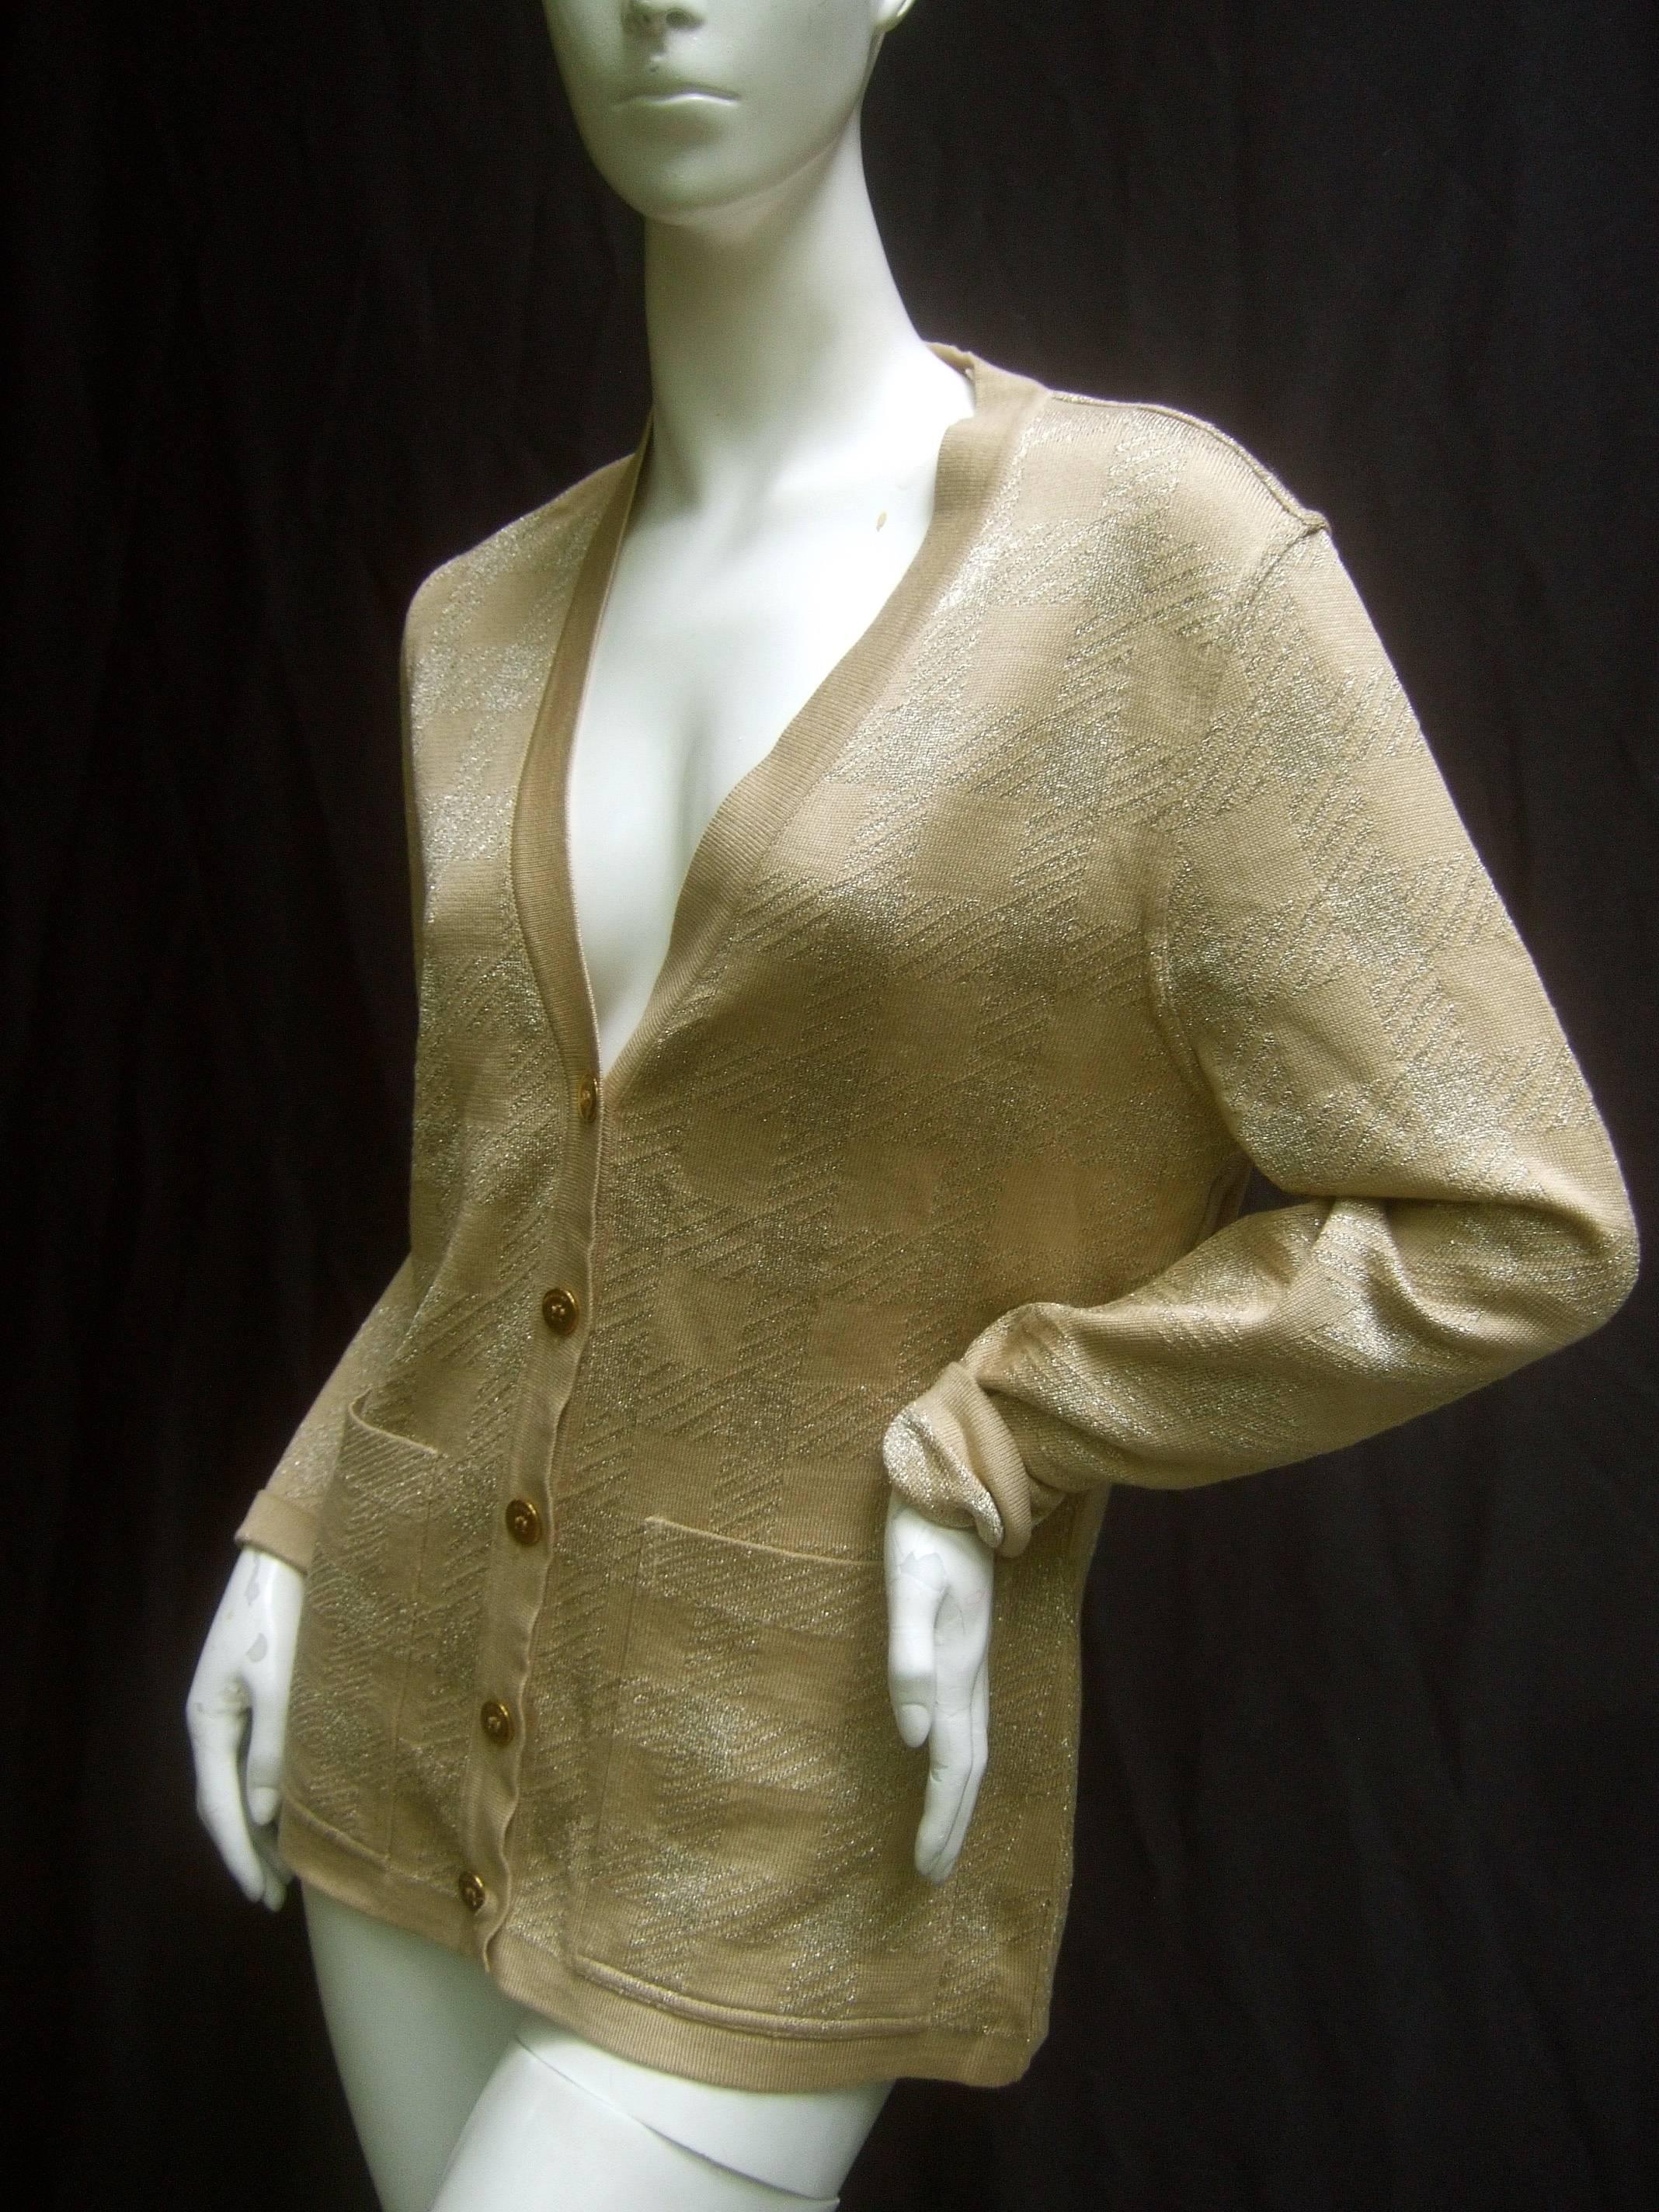 Celine Paris Gold metallic Italian knit cardigan Size 38
The stylish gold metallic knit cardigan is adorned 
with five gilt metal buttons each inscribed Celine 

The gold metallic knit fabric has a subtle checkered
design in two shades of gold